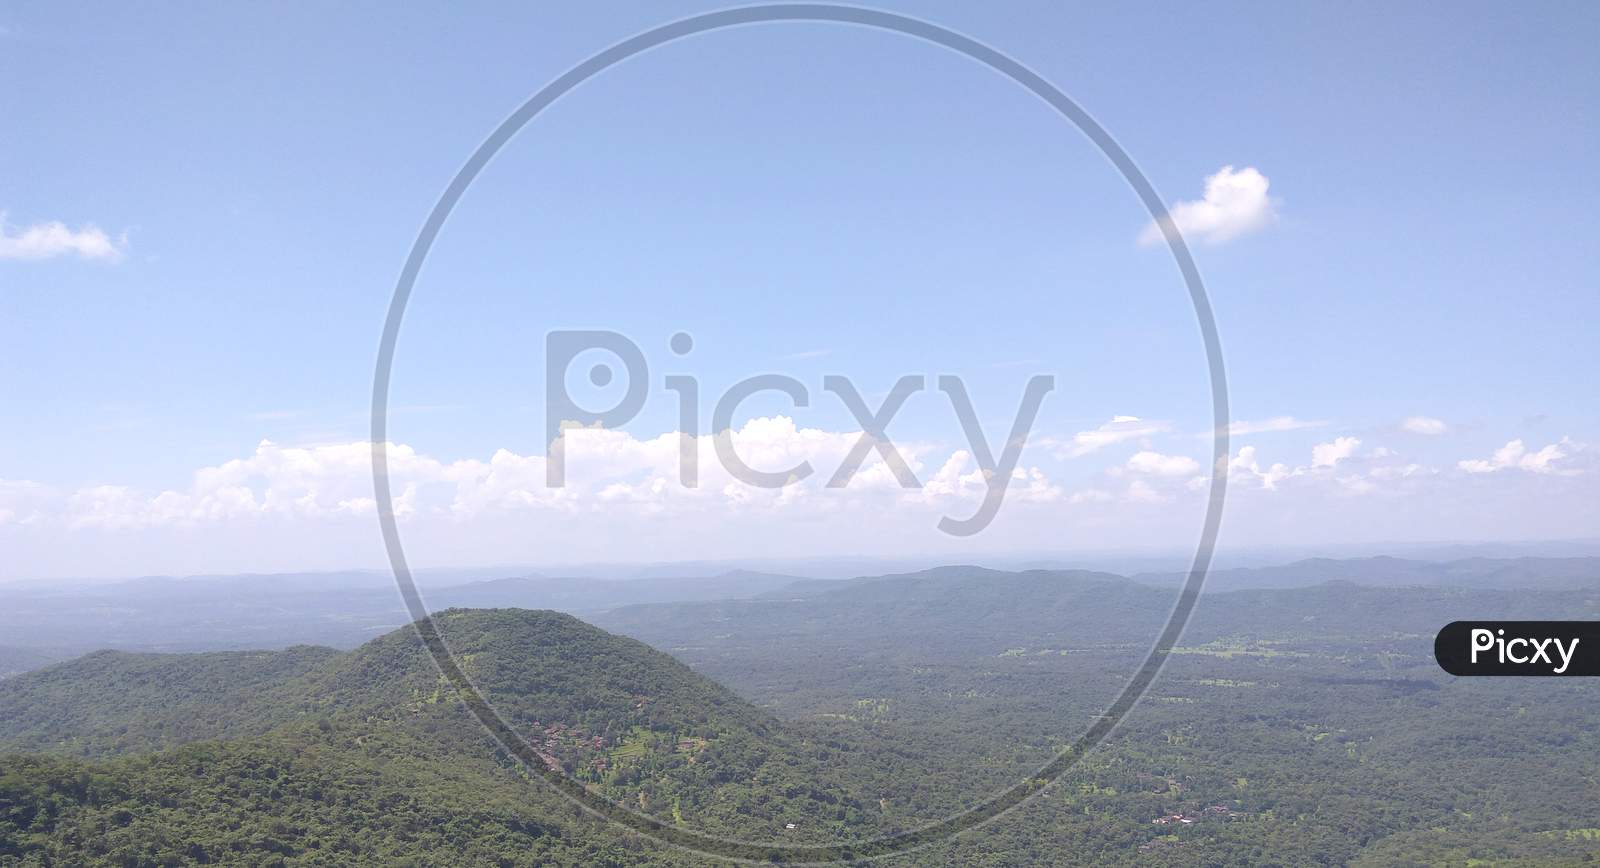 The Forest And Blue Sky Background Scenery. Mountain Range Peak Clouds Landscape. Mountain Range Clouds View.